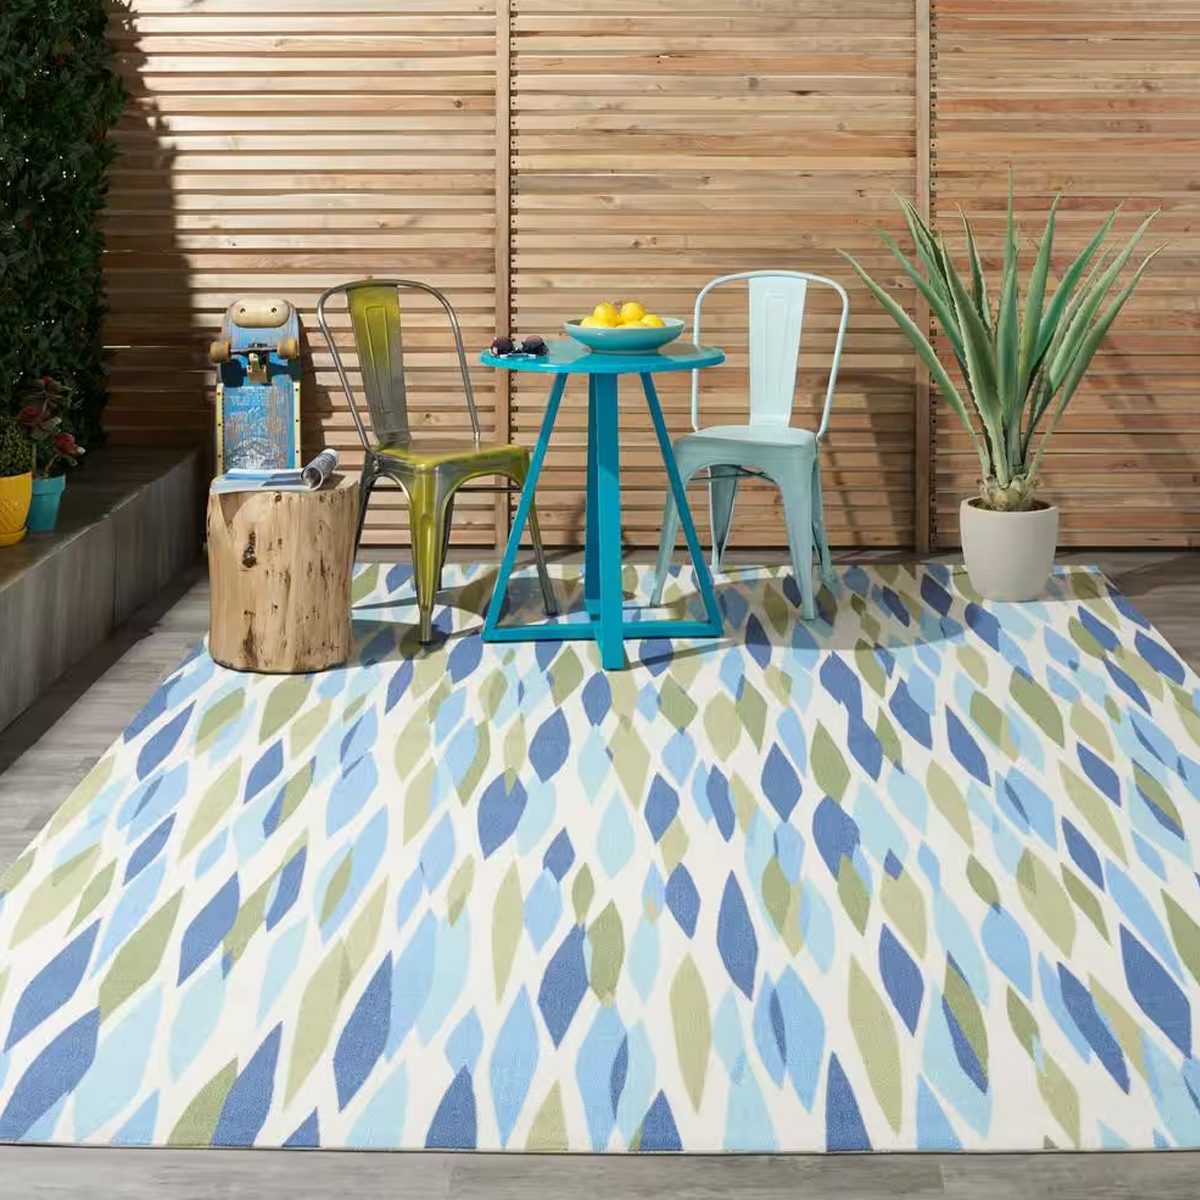 Bits And Pieces Seaglass 8 Ft. X 11 Ft. Geometric Modern Indoor Outdoor Patio Area Rug Ecomm Homedepot.com